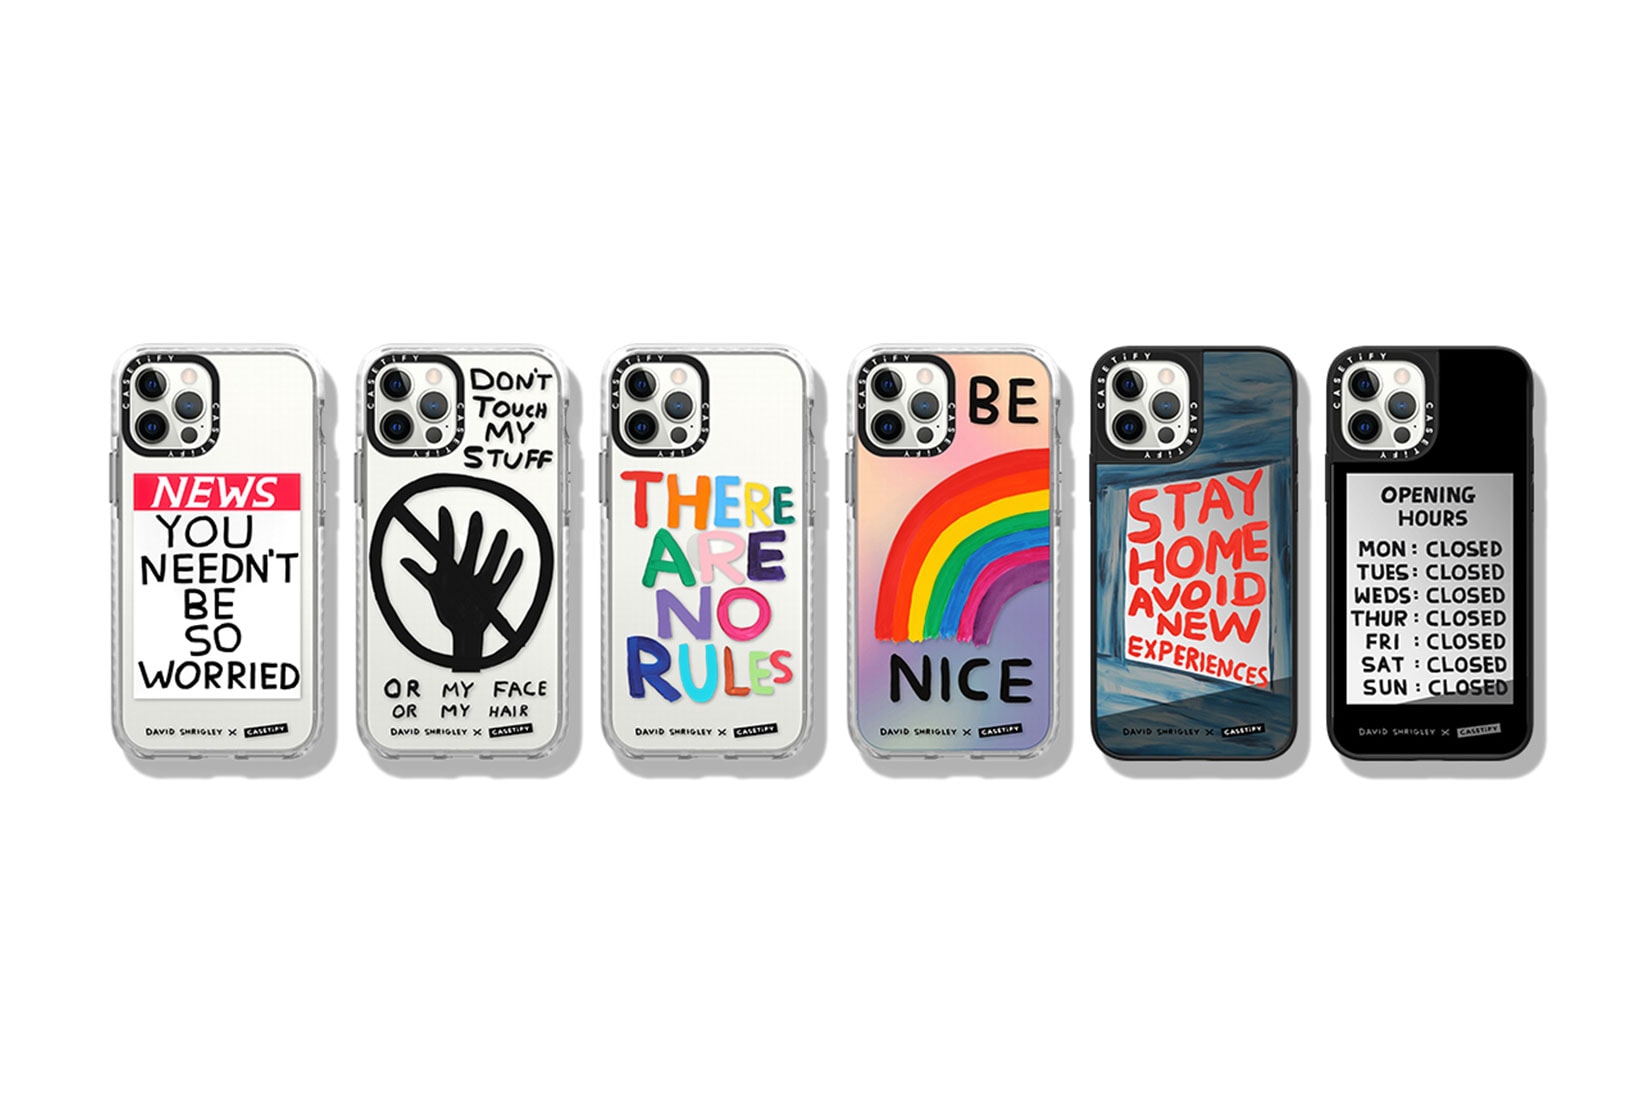 david shrigley casetify collaboration tech accessories iphone cases rainbow don't touch there are no rules